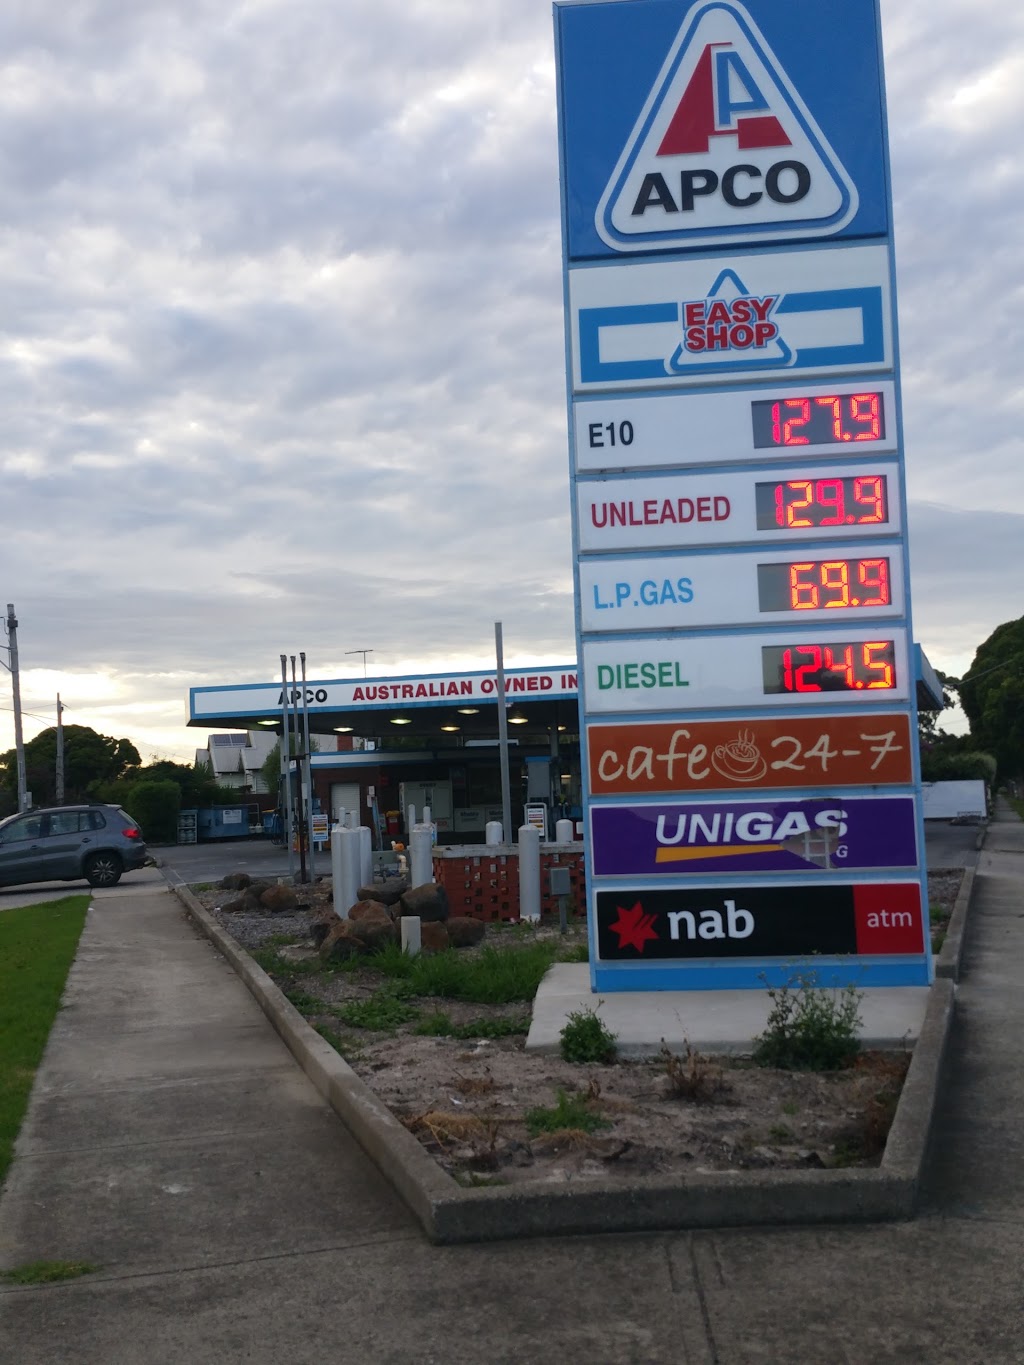 APCO Service Stations East Geelong | gas station | 57 Ormond Rd, East Geelong VIC 3219, Australia | 0352215508 OR +61 3 5221 5508